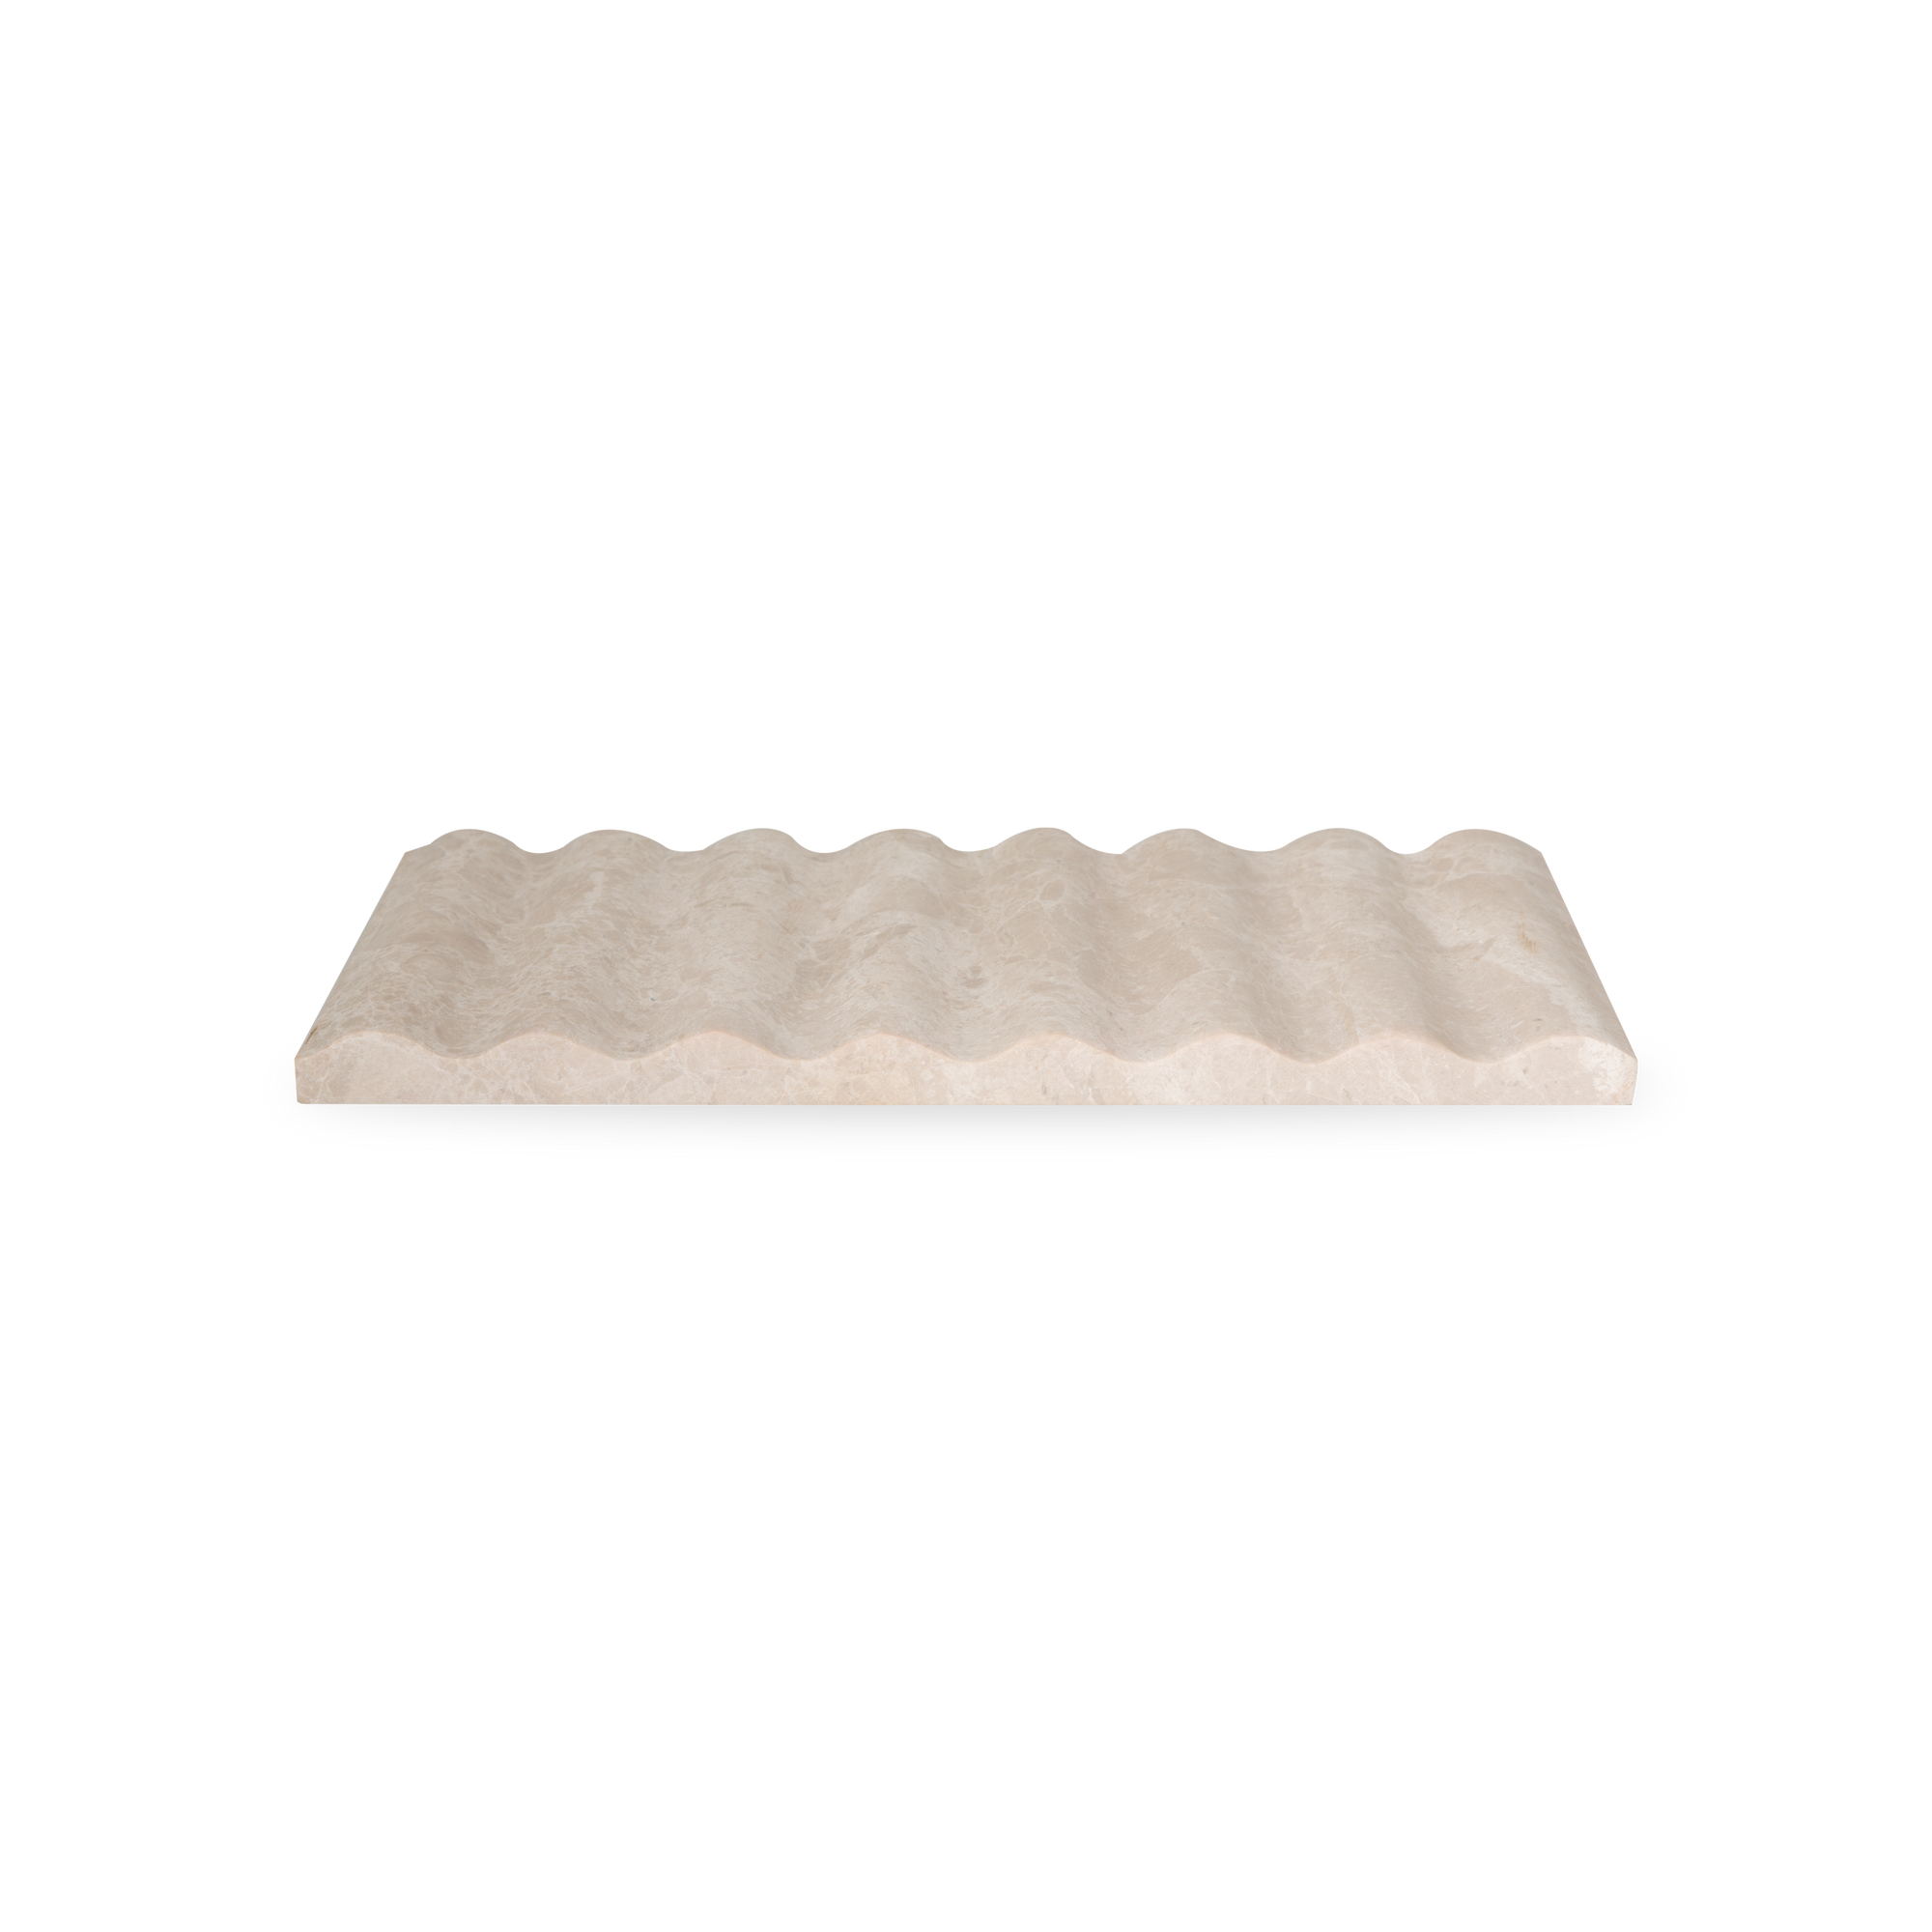 The Ridged Marble Tray is simple and sophisticated in design.